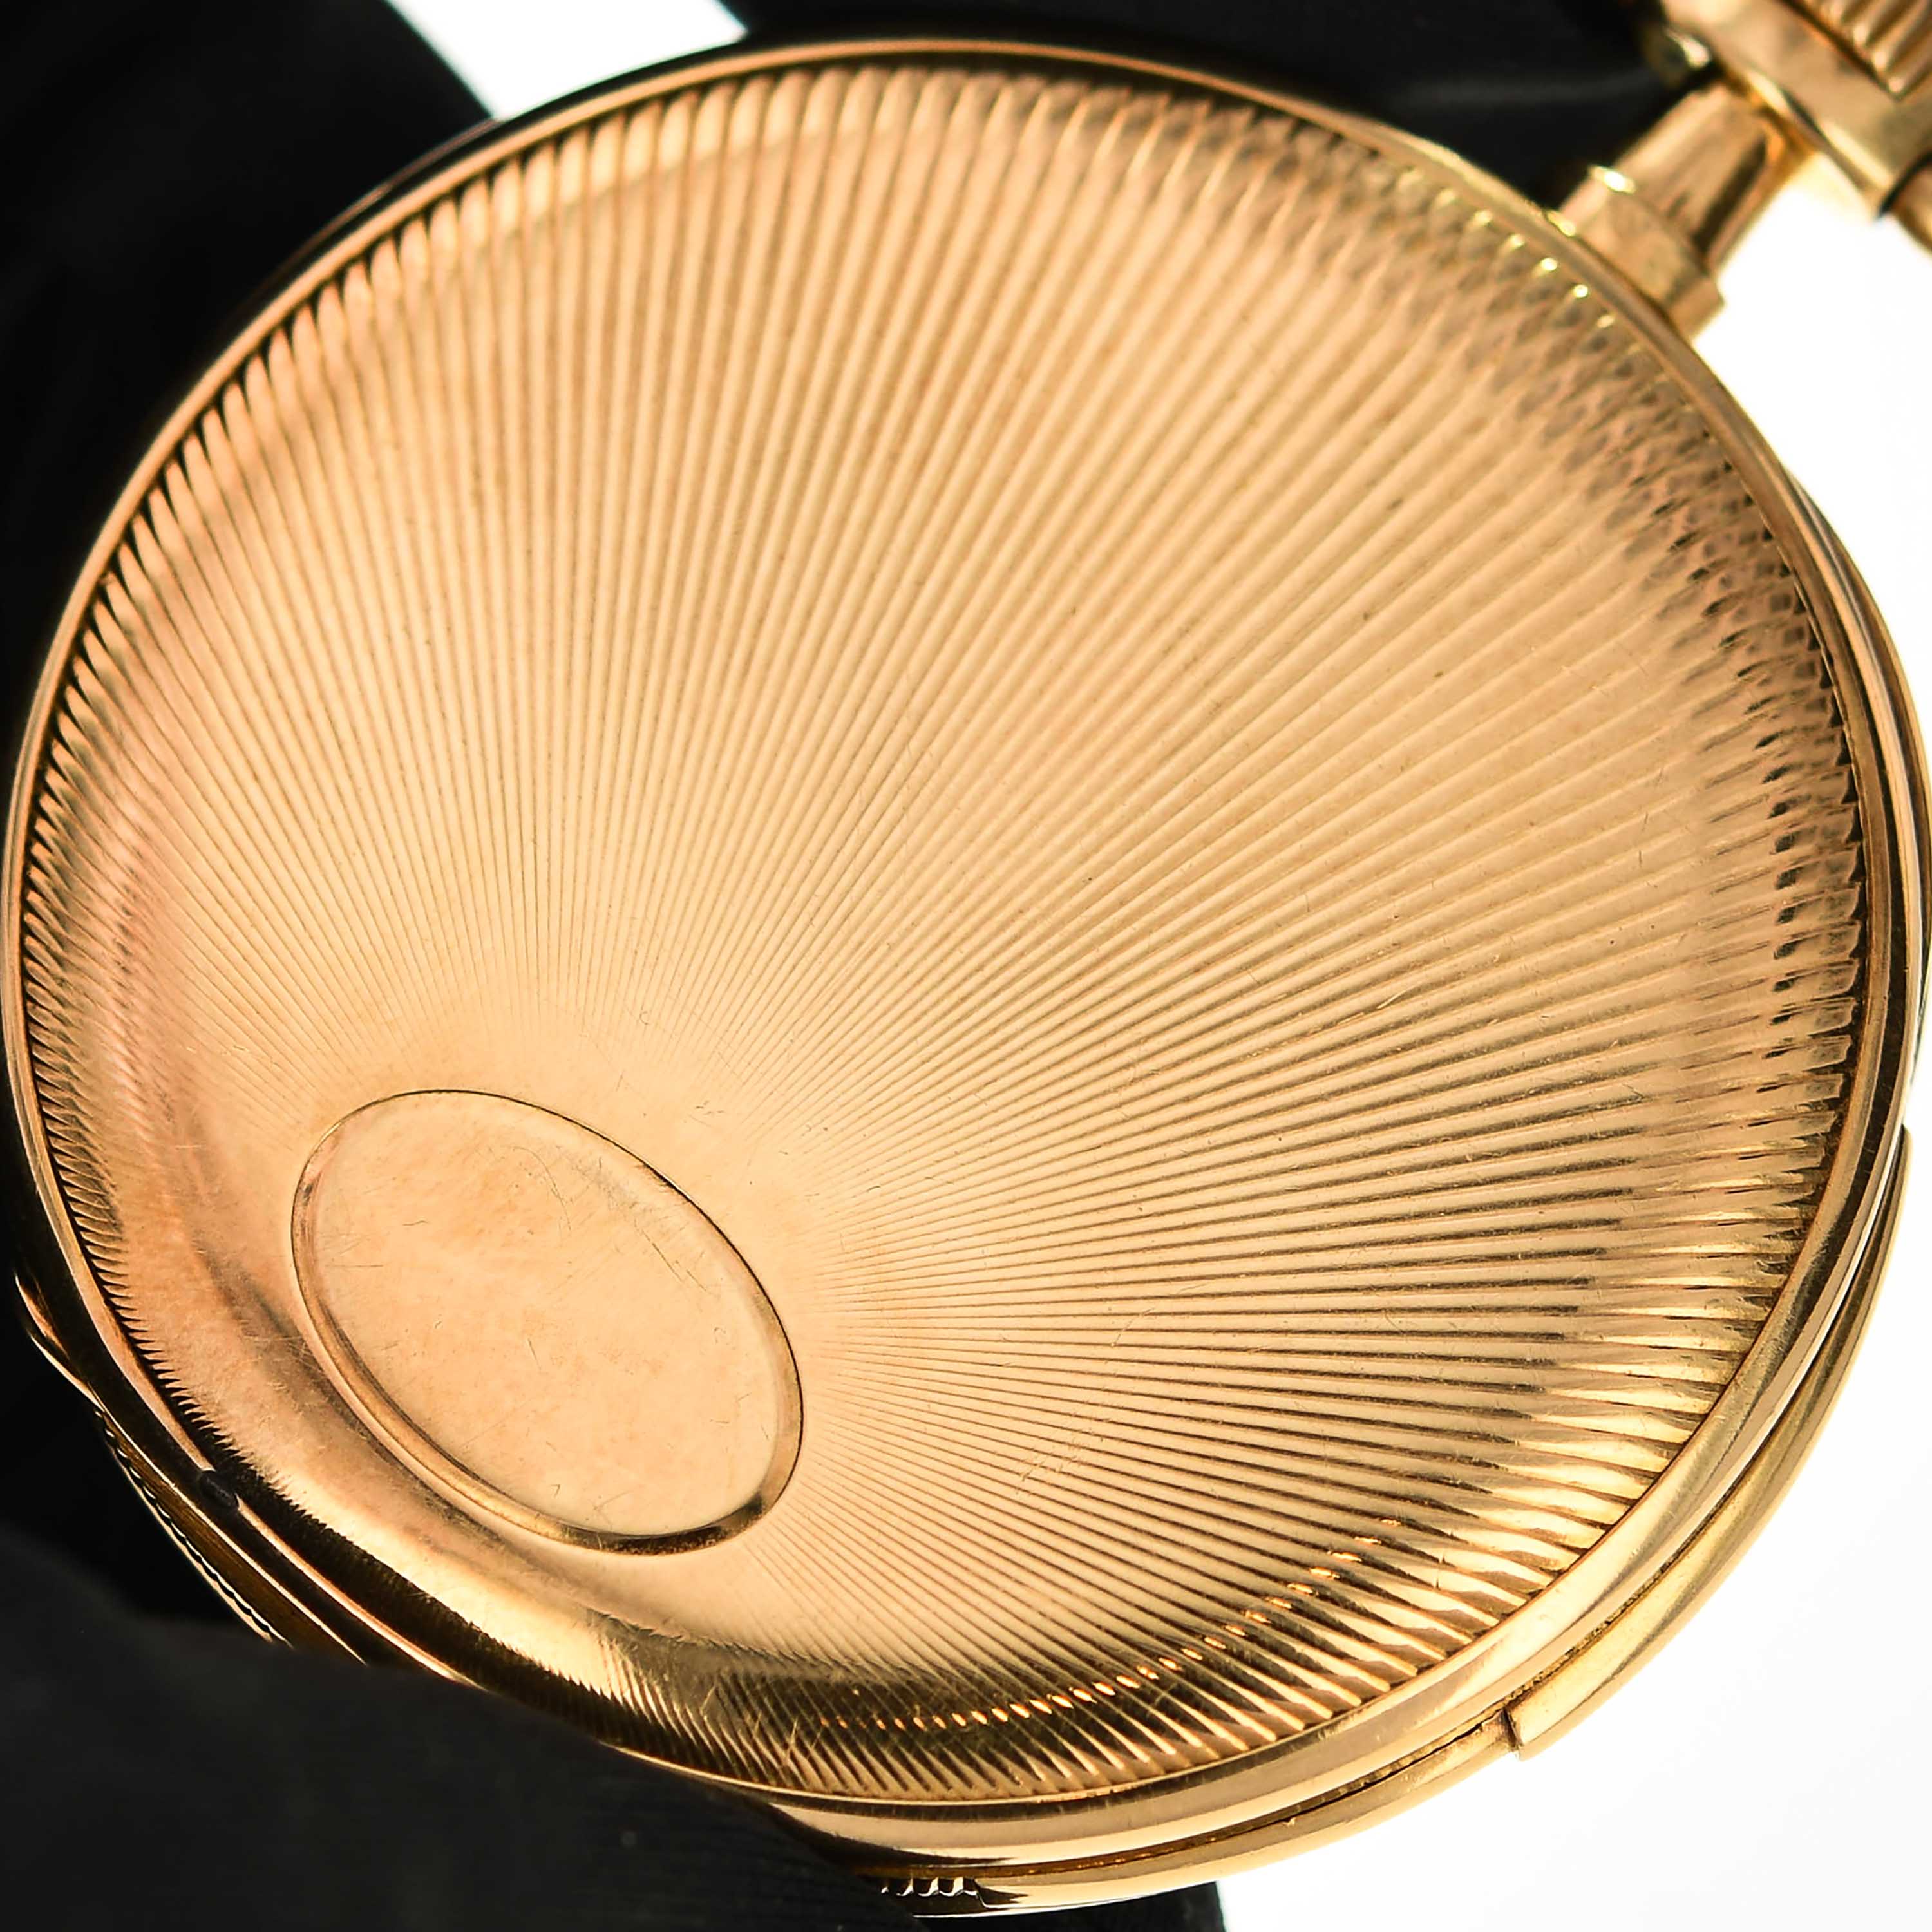 vacheron-constantin-openface-minute-repeater-pocketwatch-img-main9